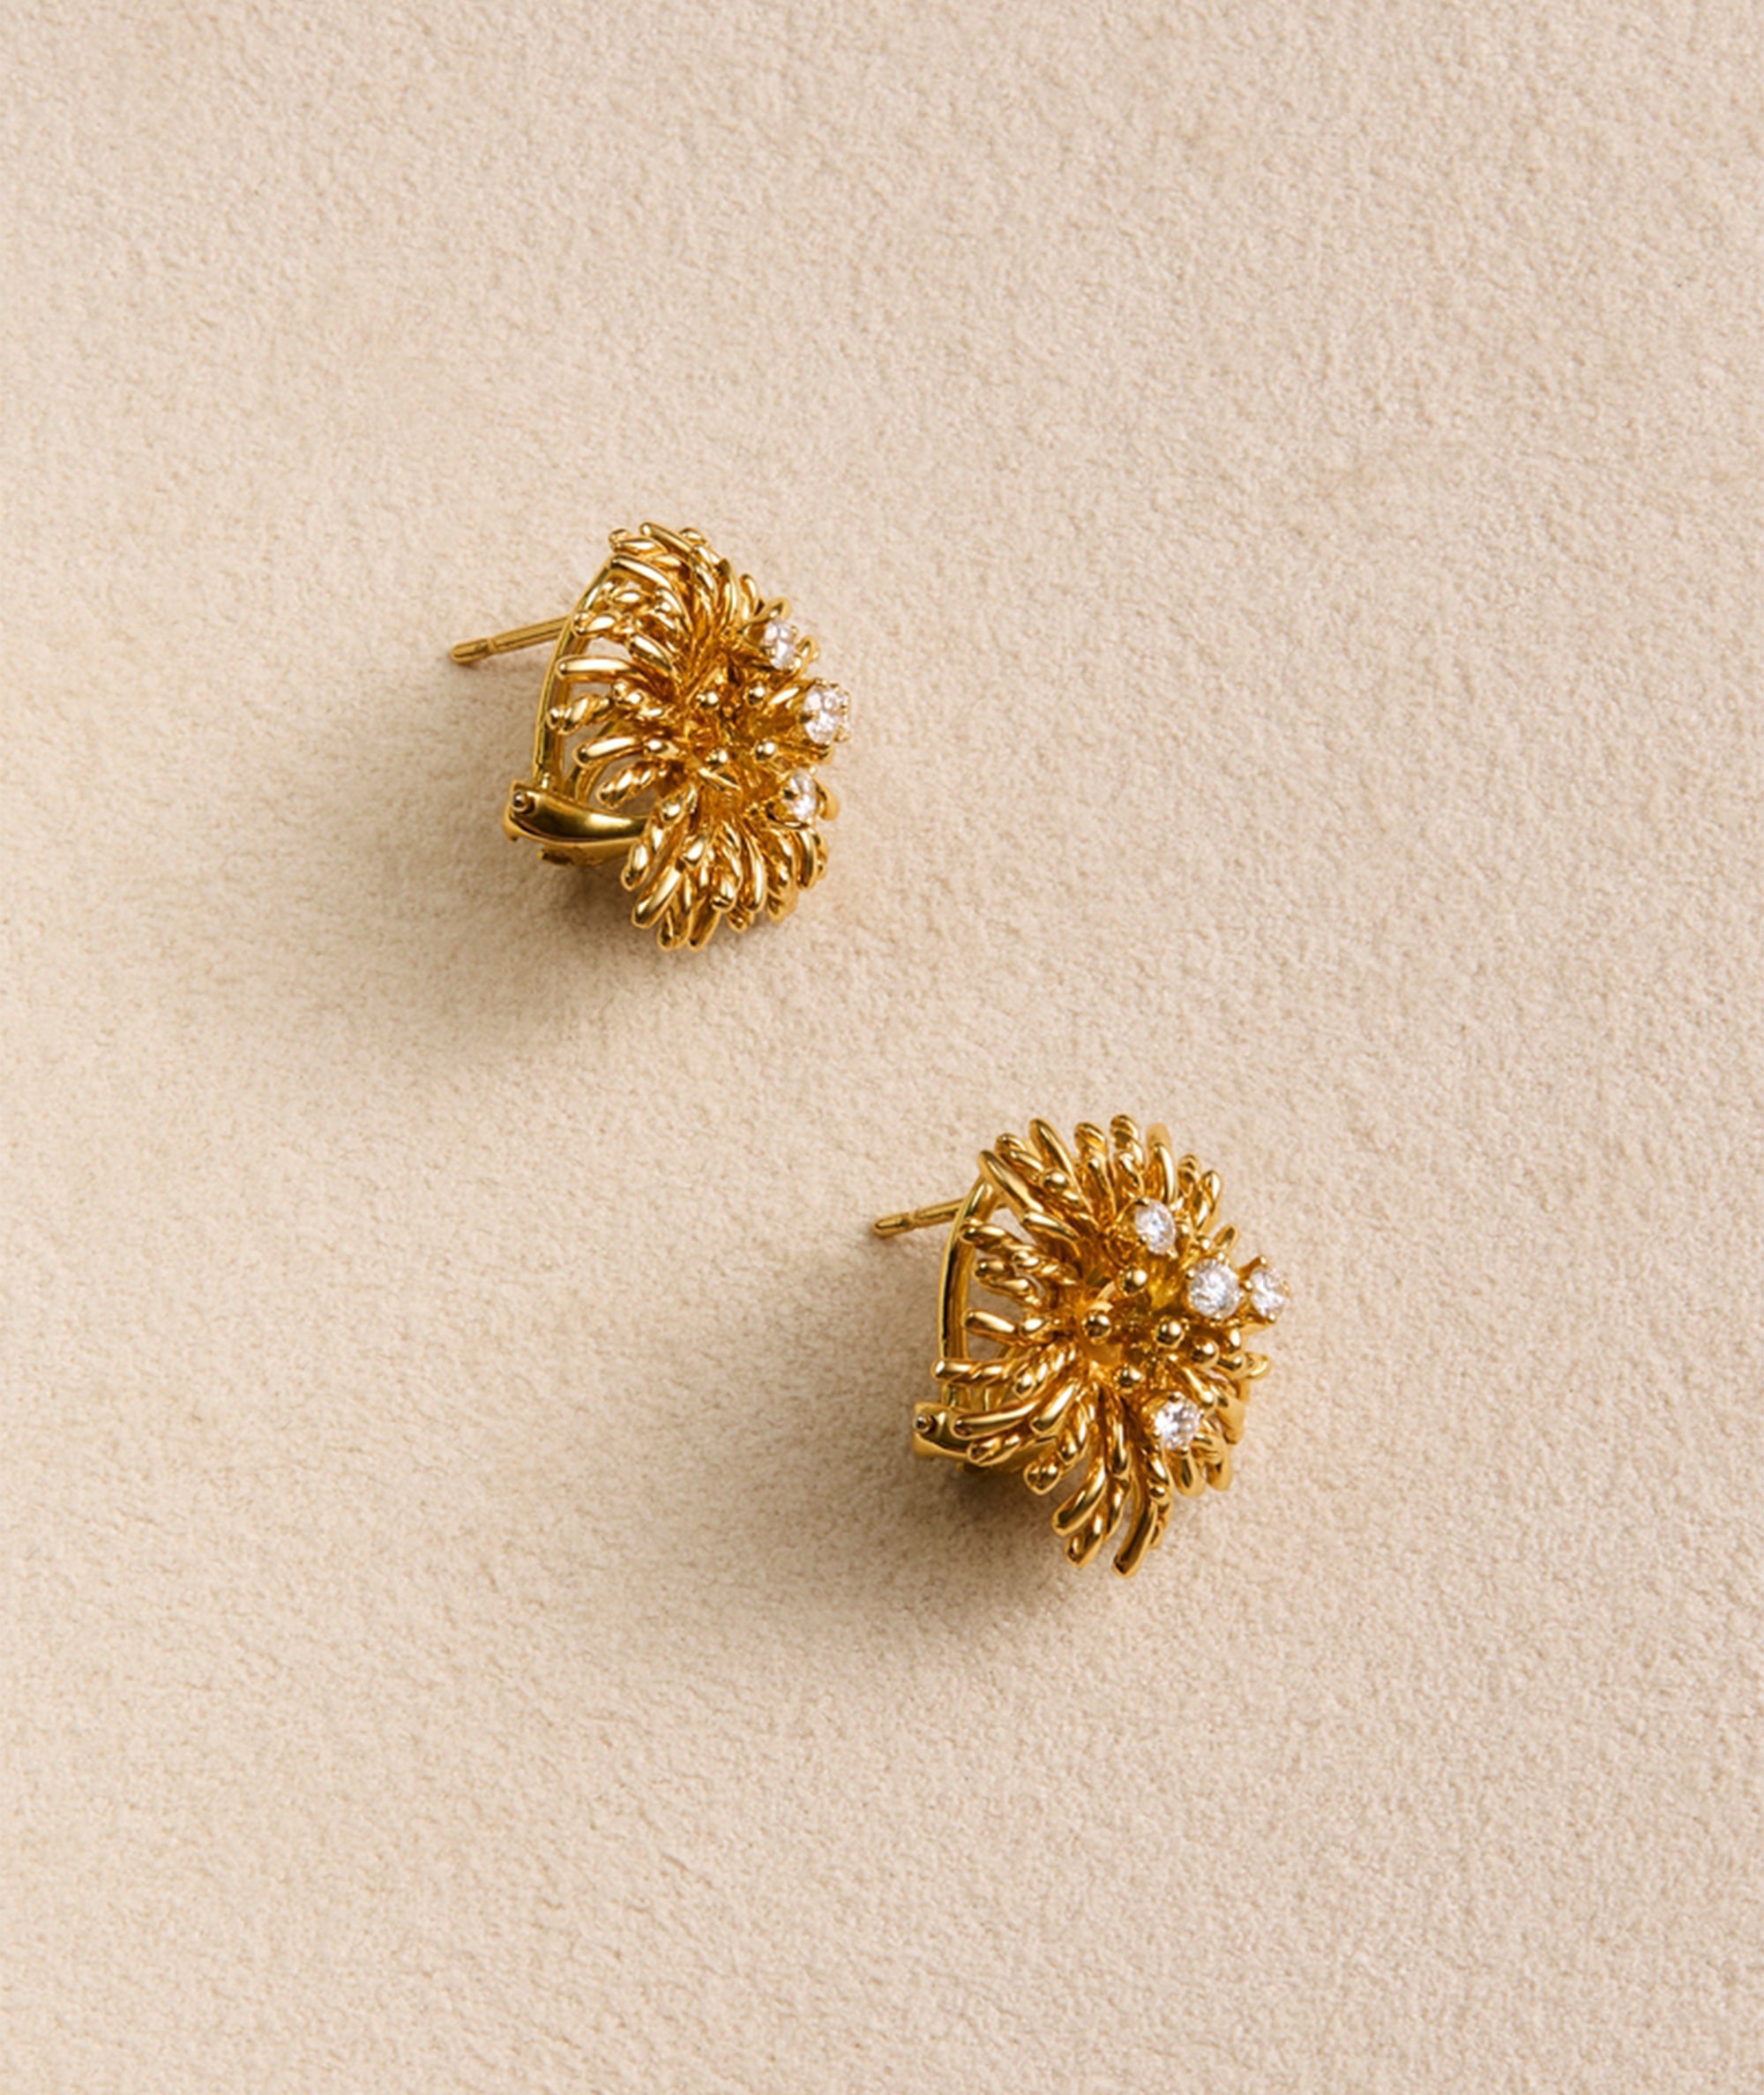 Vintage earrings from Tiffany & Co. in yellow gold with diamonds. Exclusively sourced for EREDE Curated.